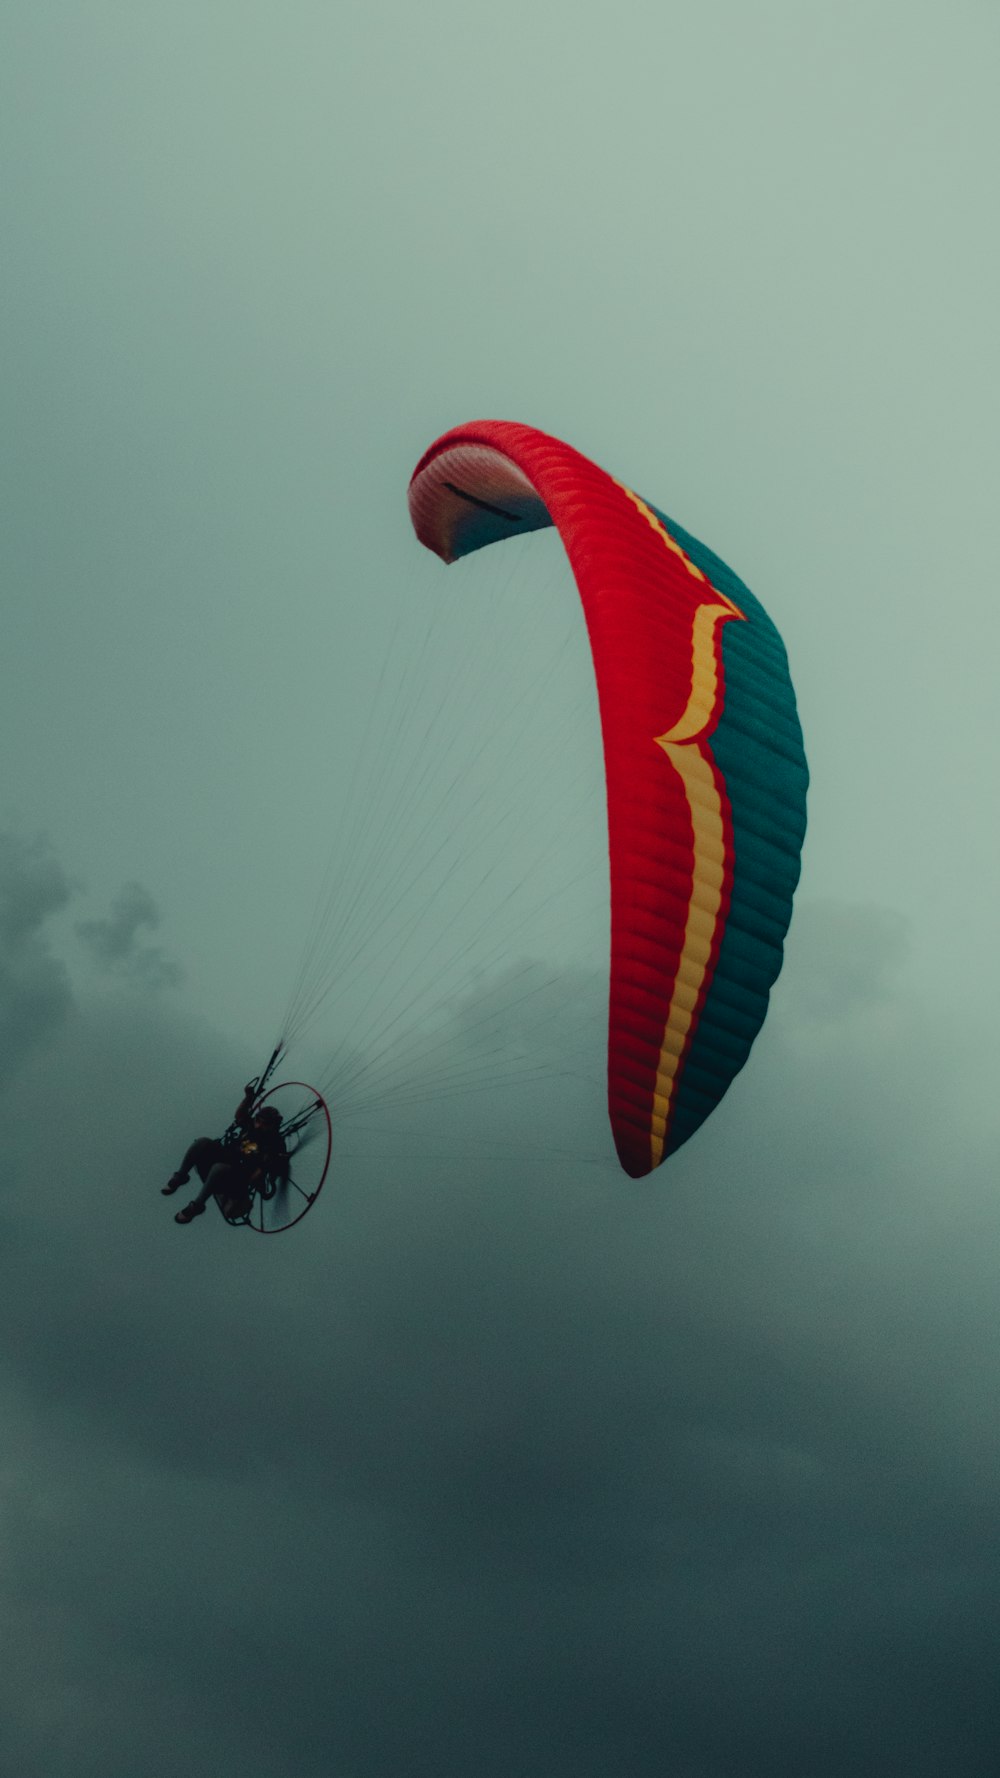 a person is parasailing on a cloudy day